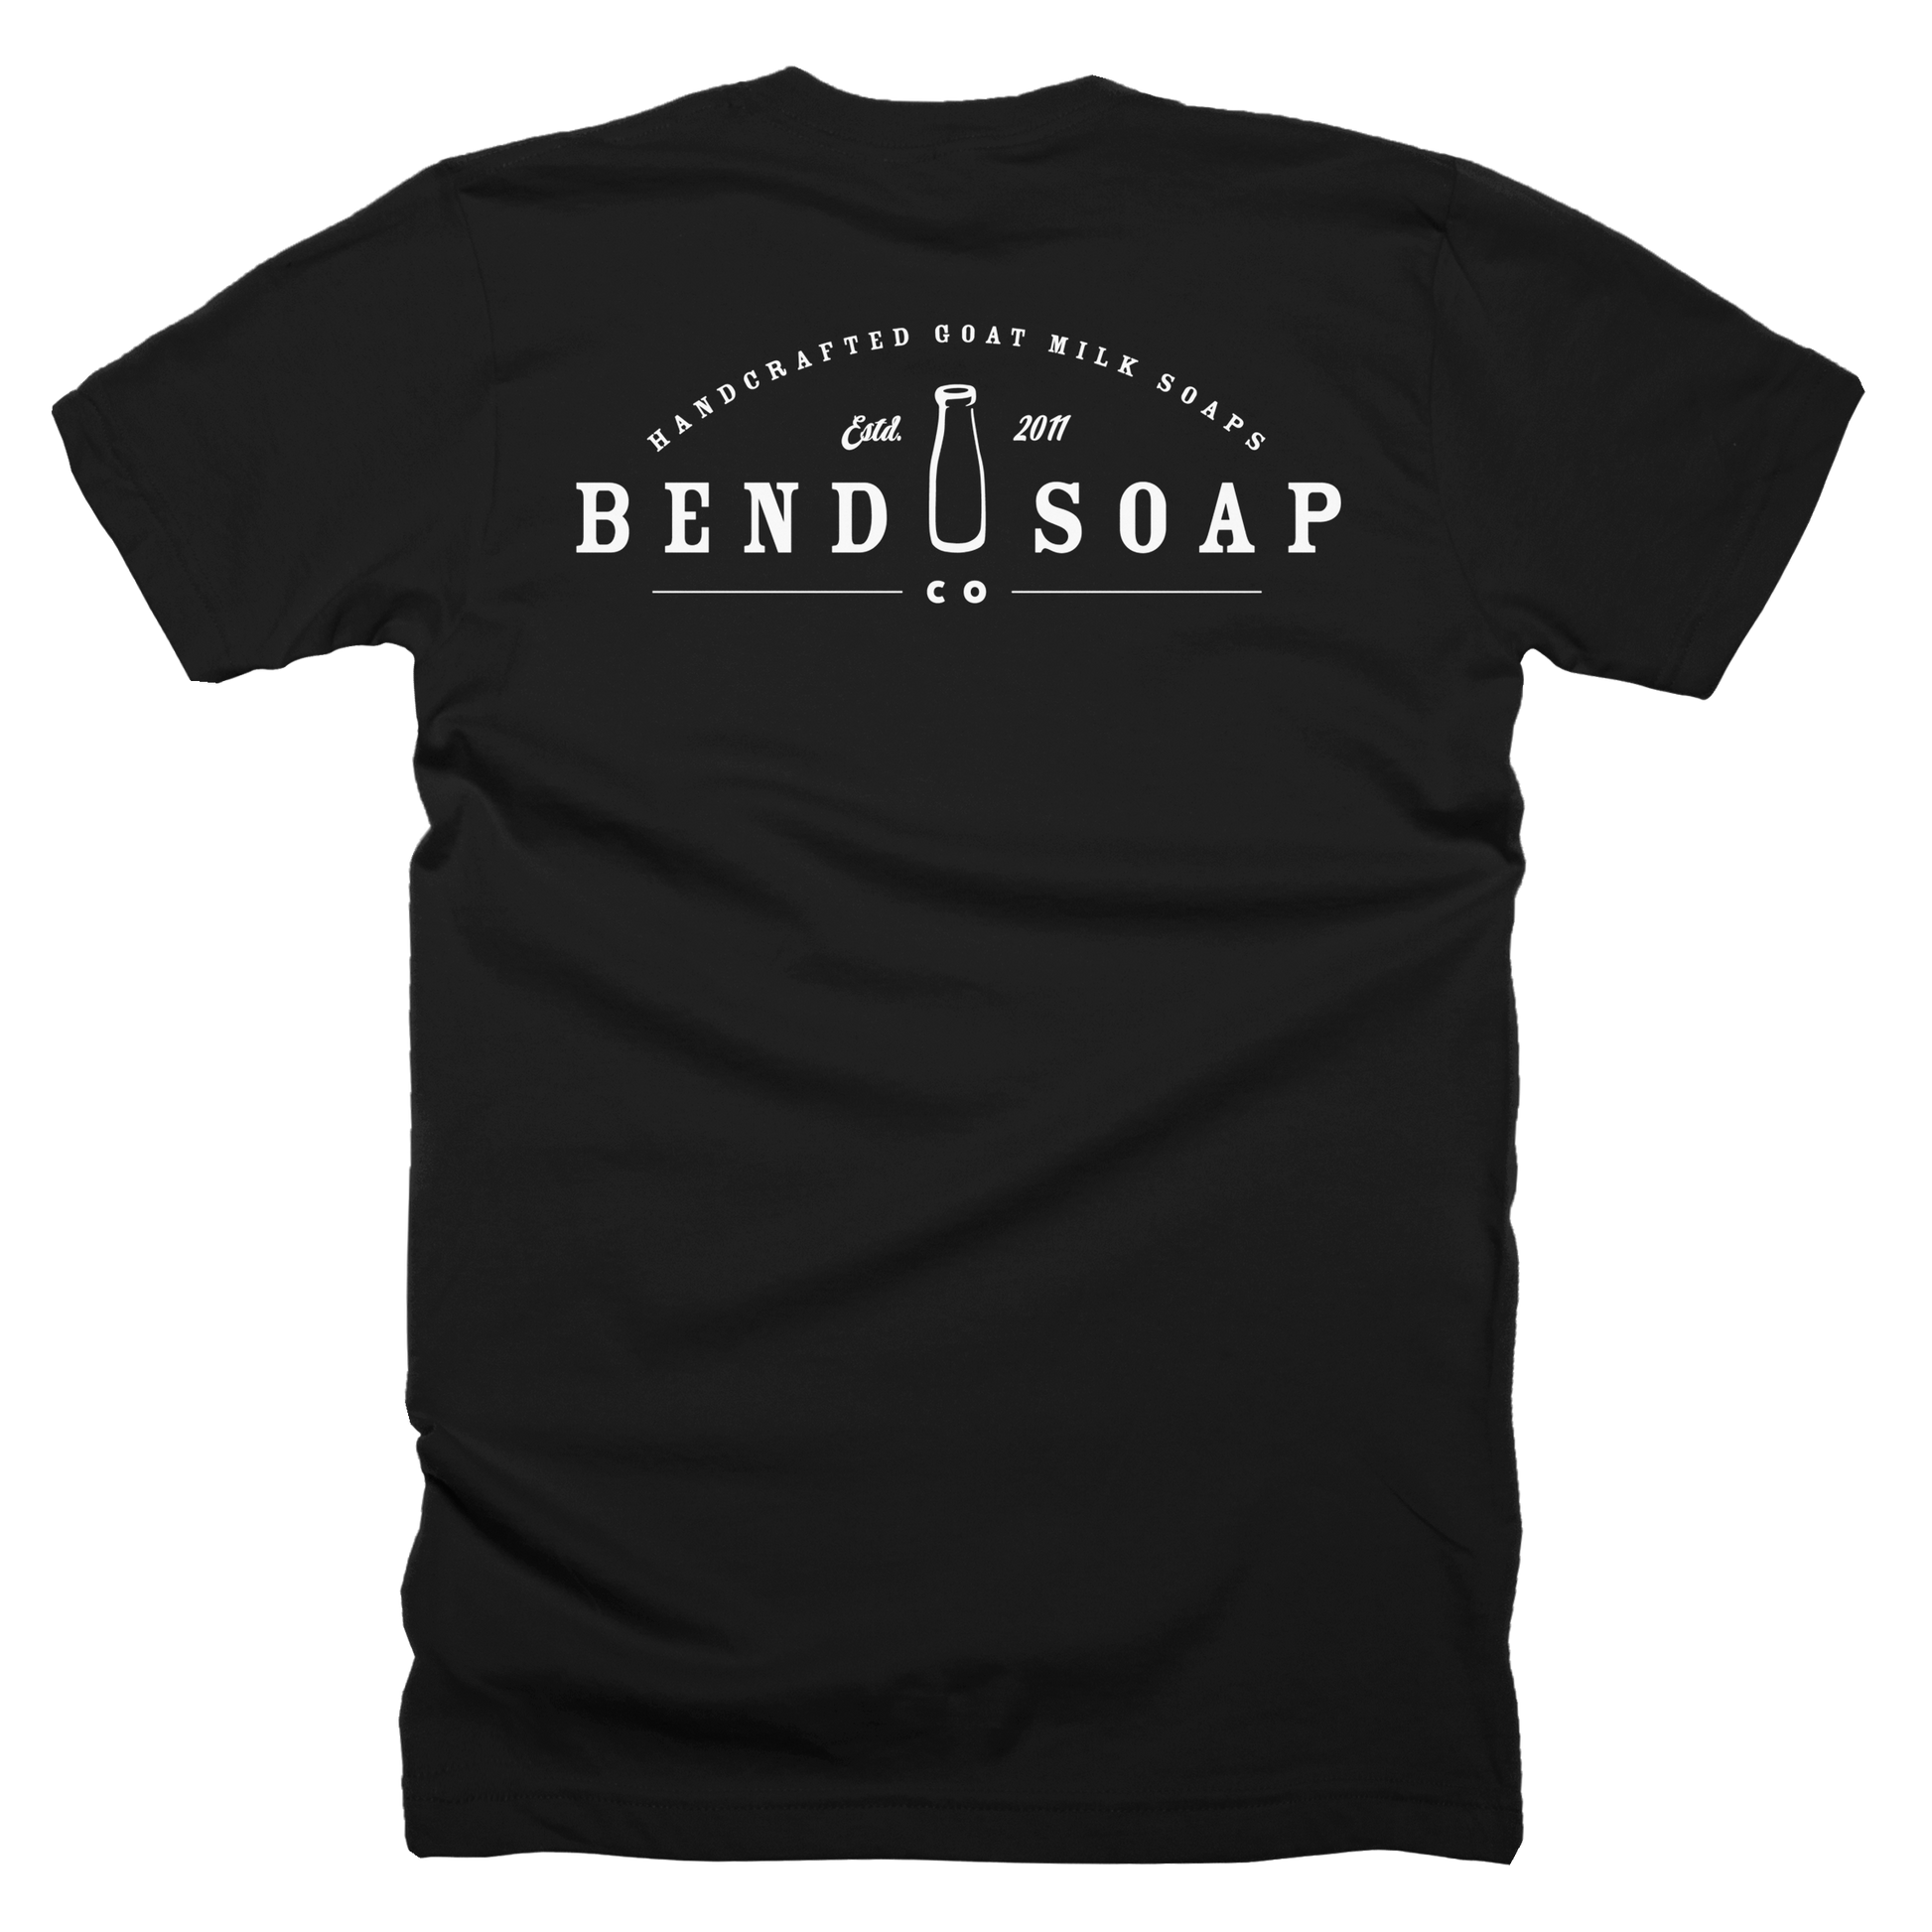 Back view of the Black Male Bend Soap Tee-shirt